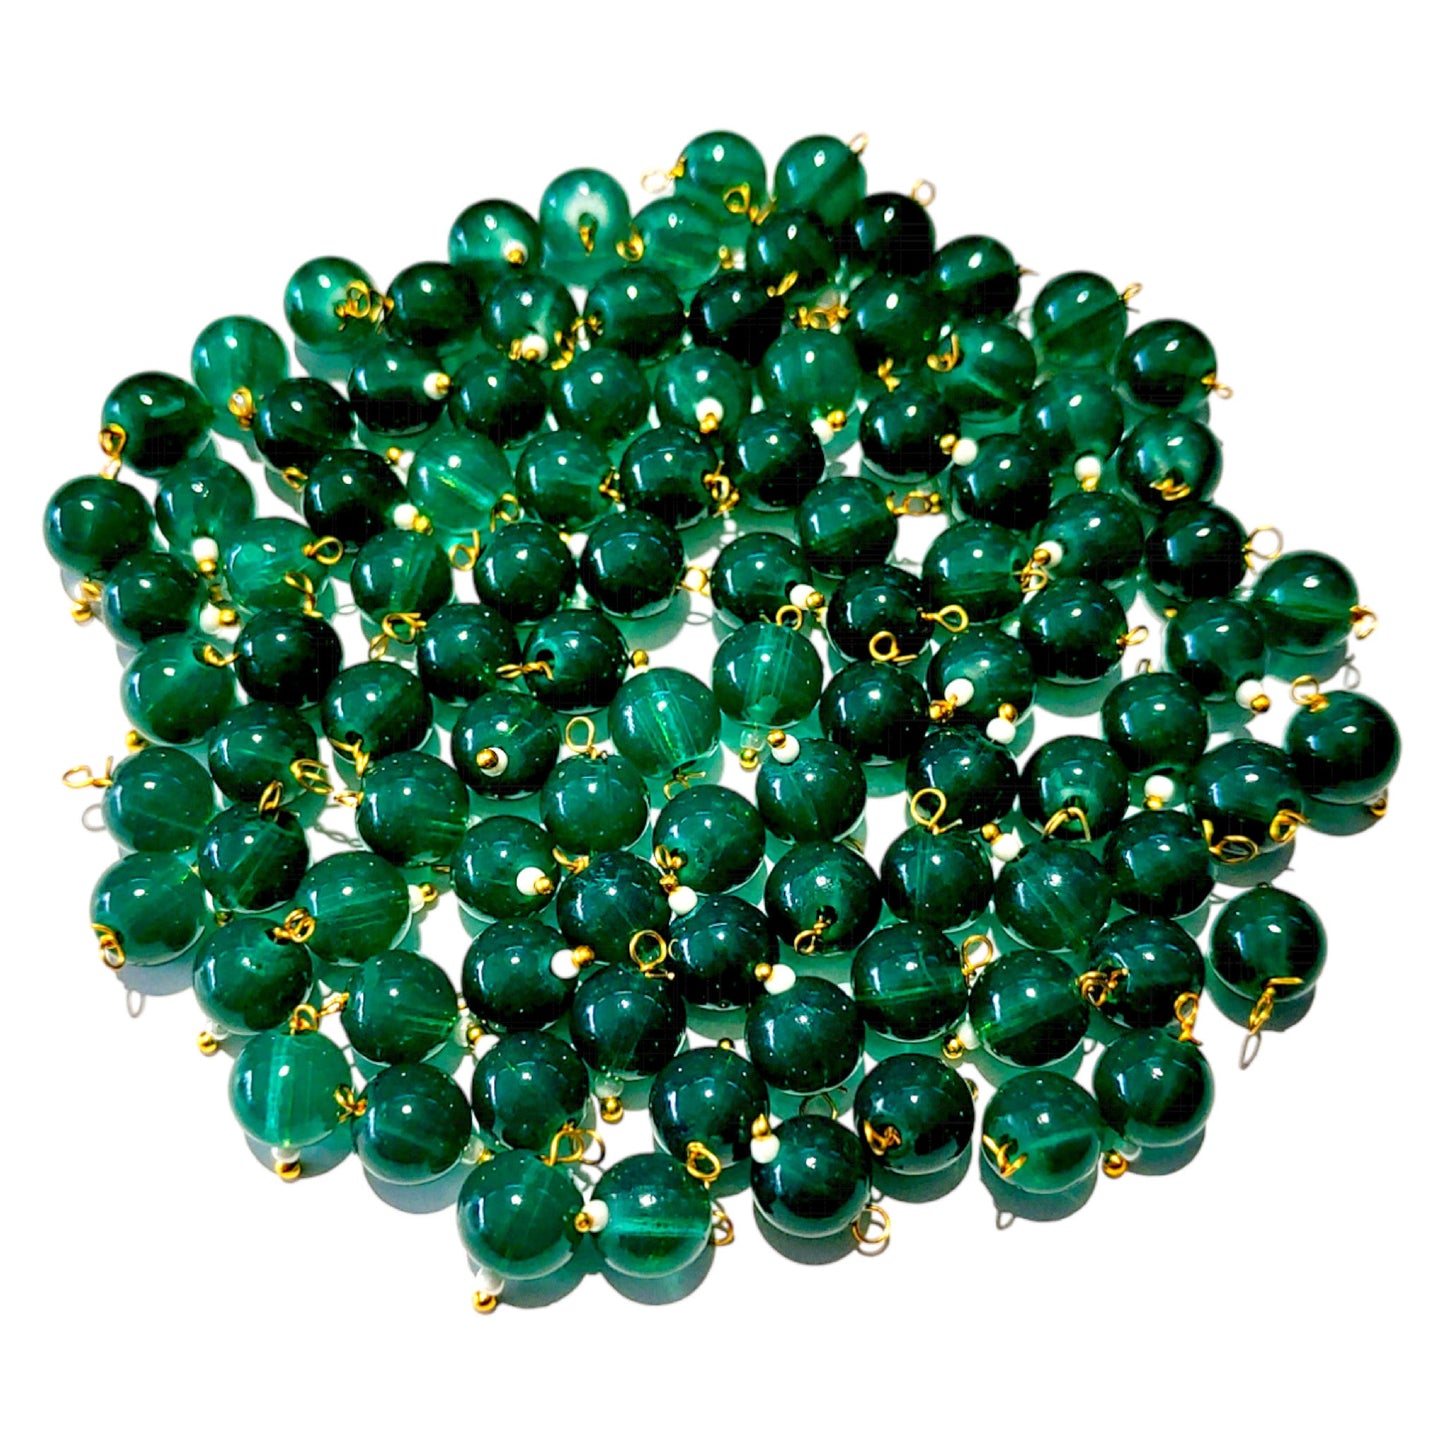 Round Glossy Ball Color Glass Bead for Jewlellery Crafting Or Decoration - 8x8mm - 11759